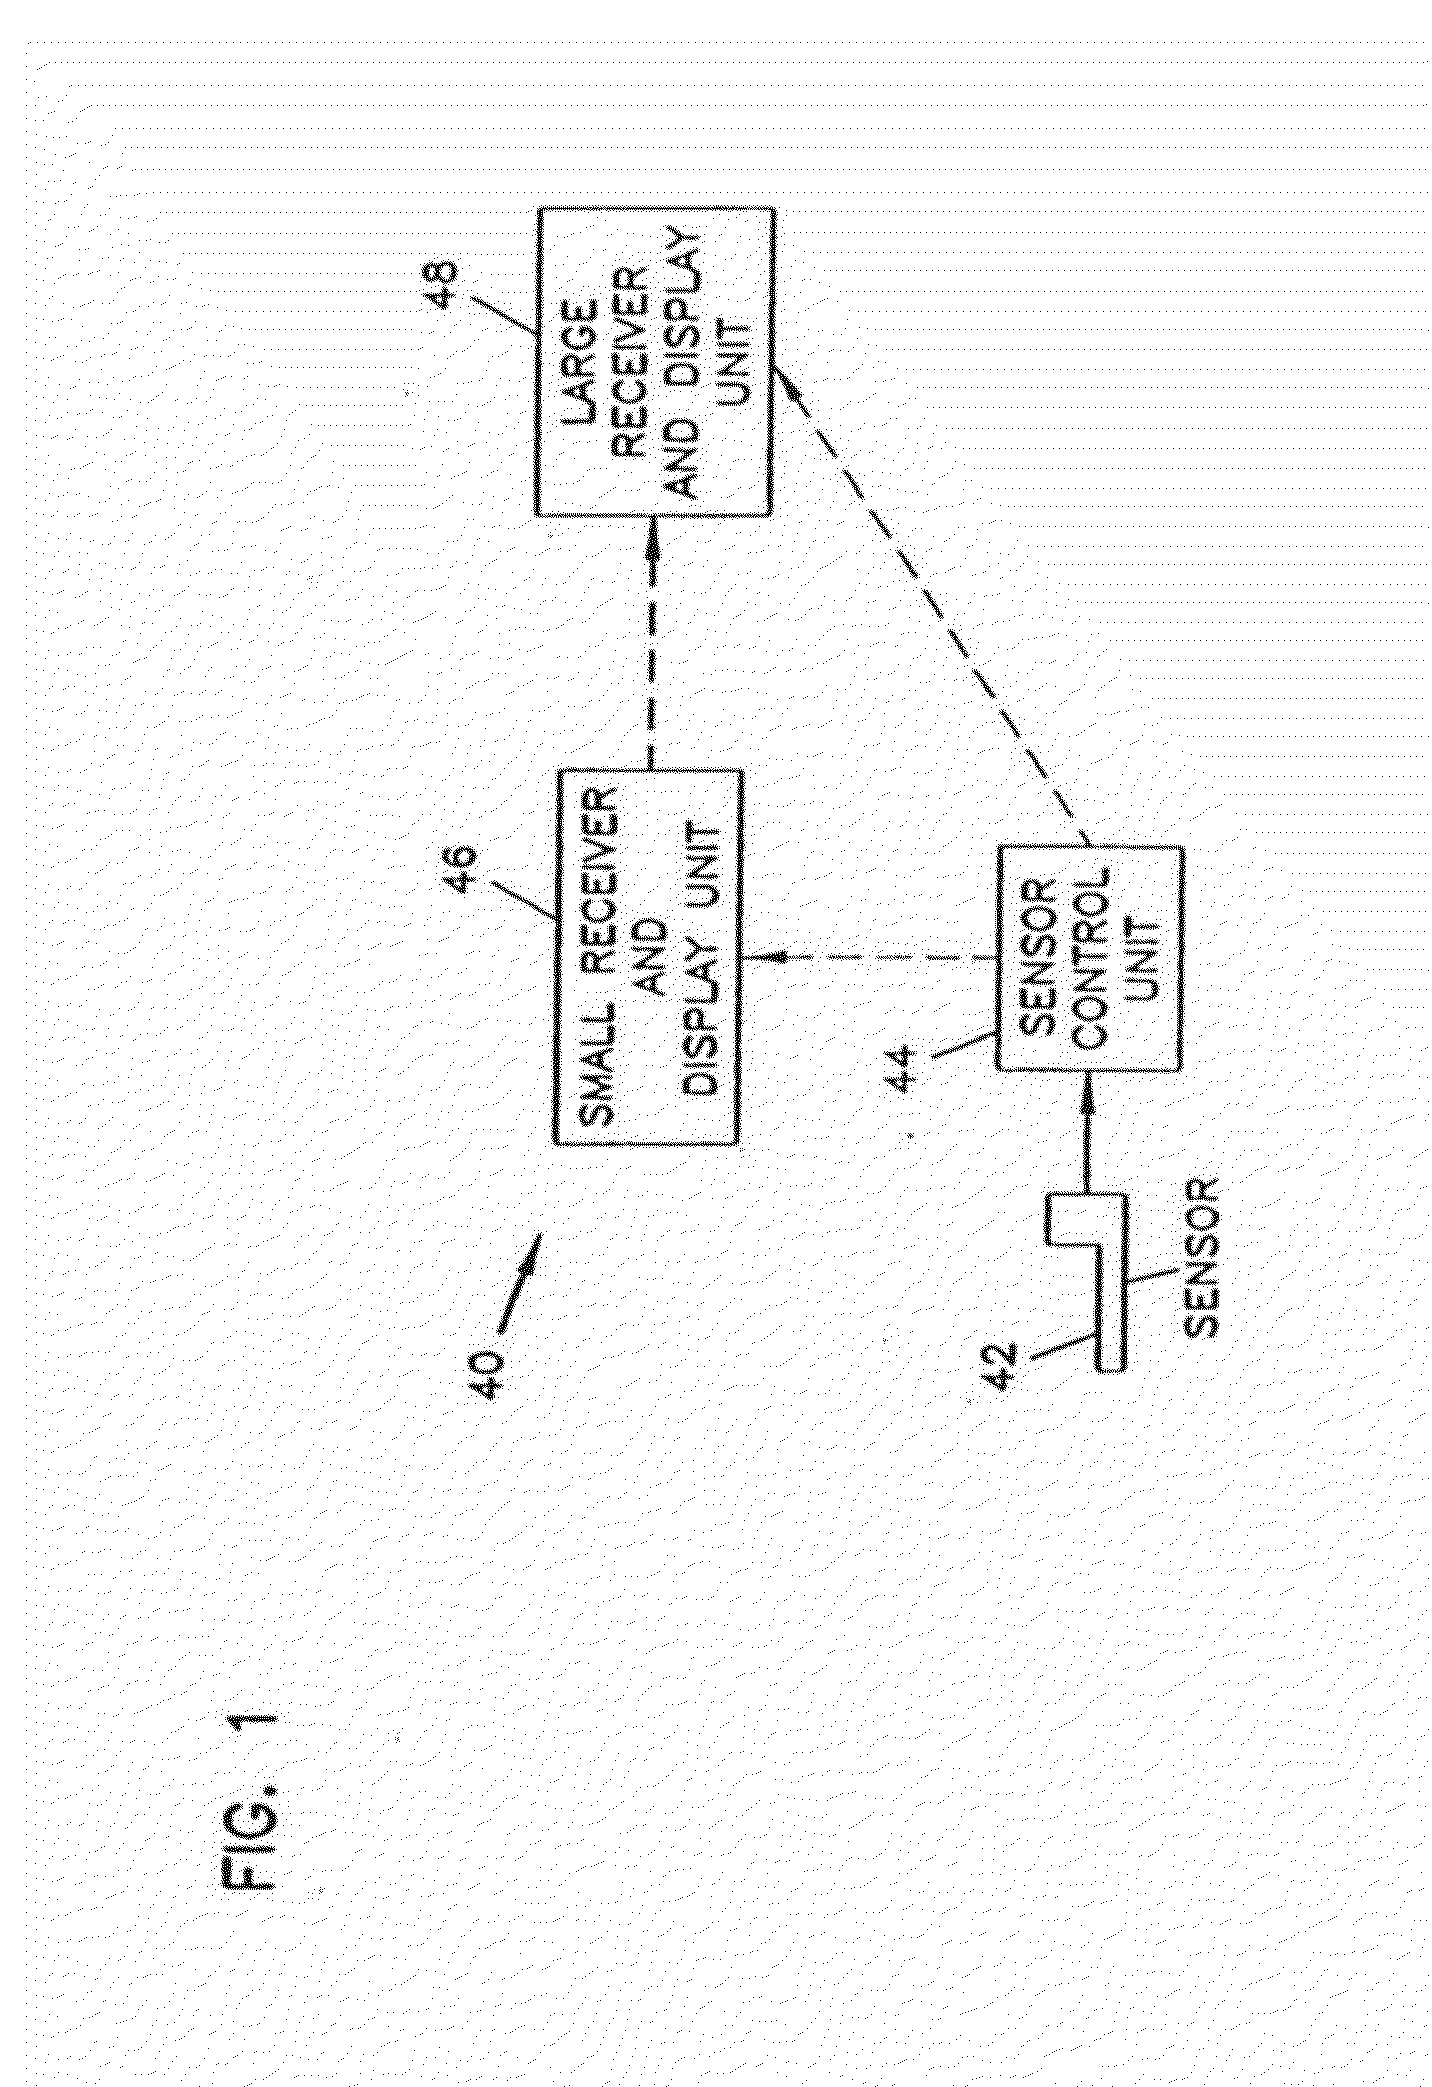 Analyte Monitoring Device and Methods of Use